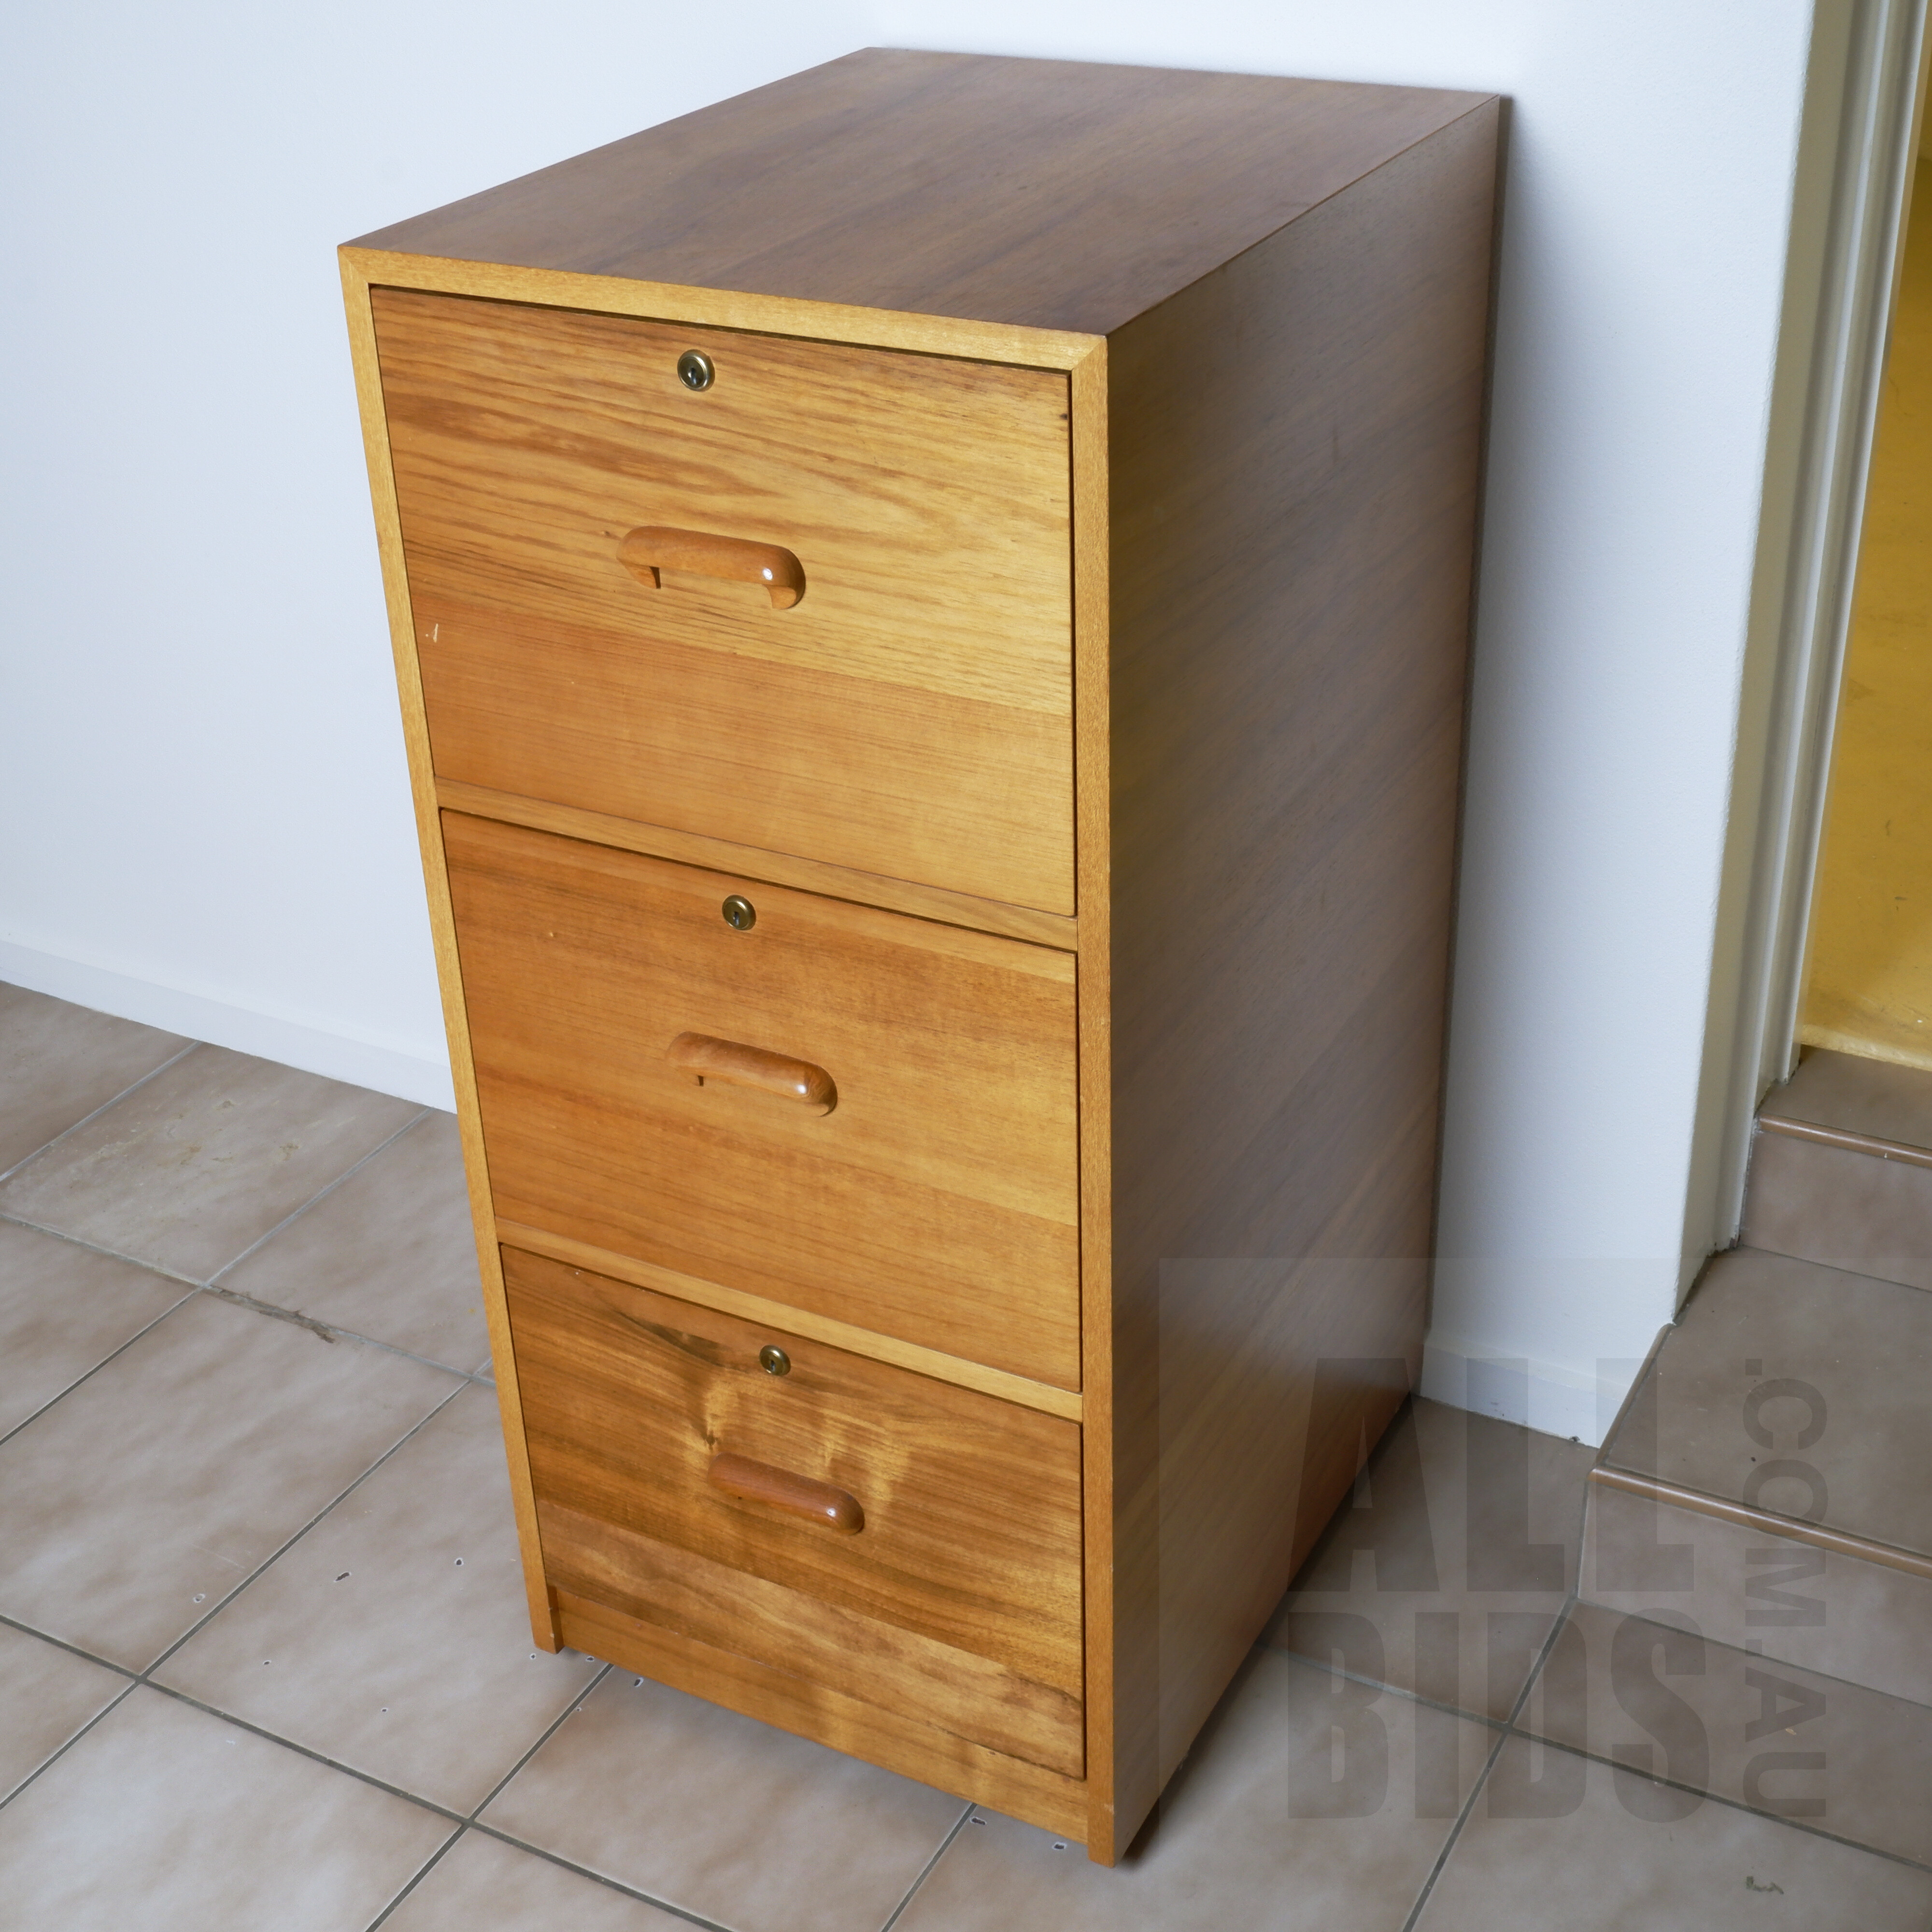 'Bespoke Hardwood Three Drawer File Cabinet, Probably Pipers Furniture'